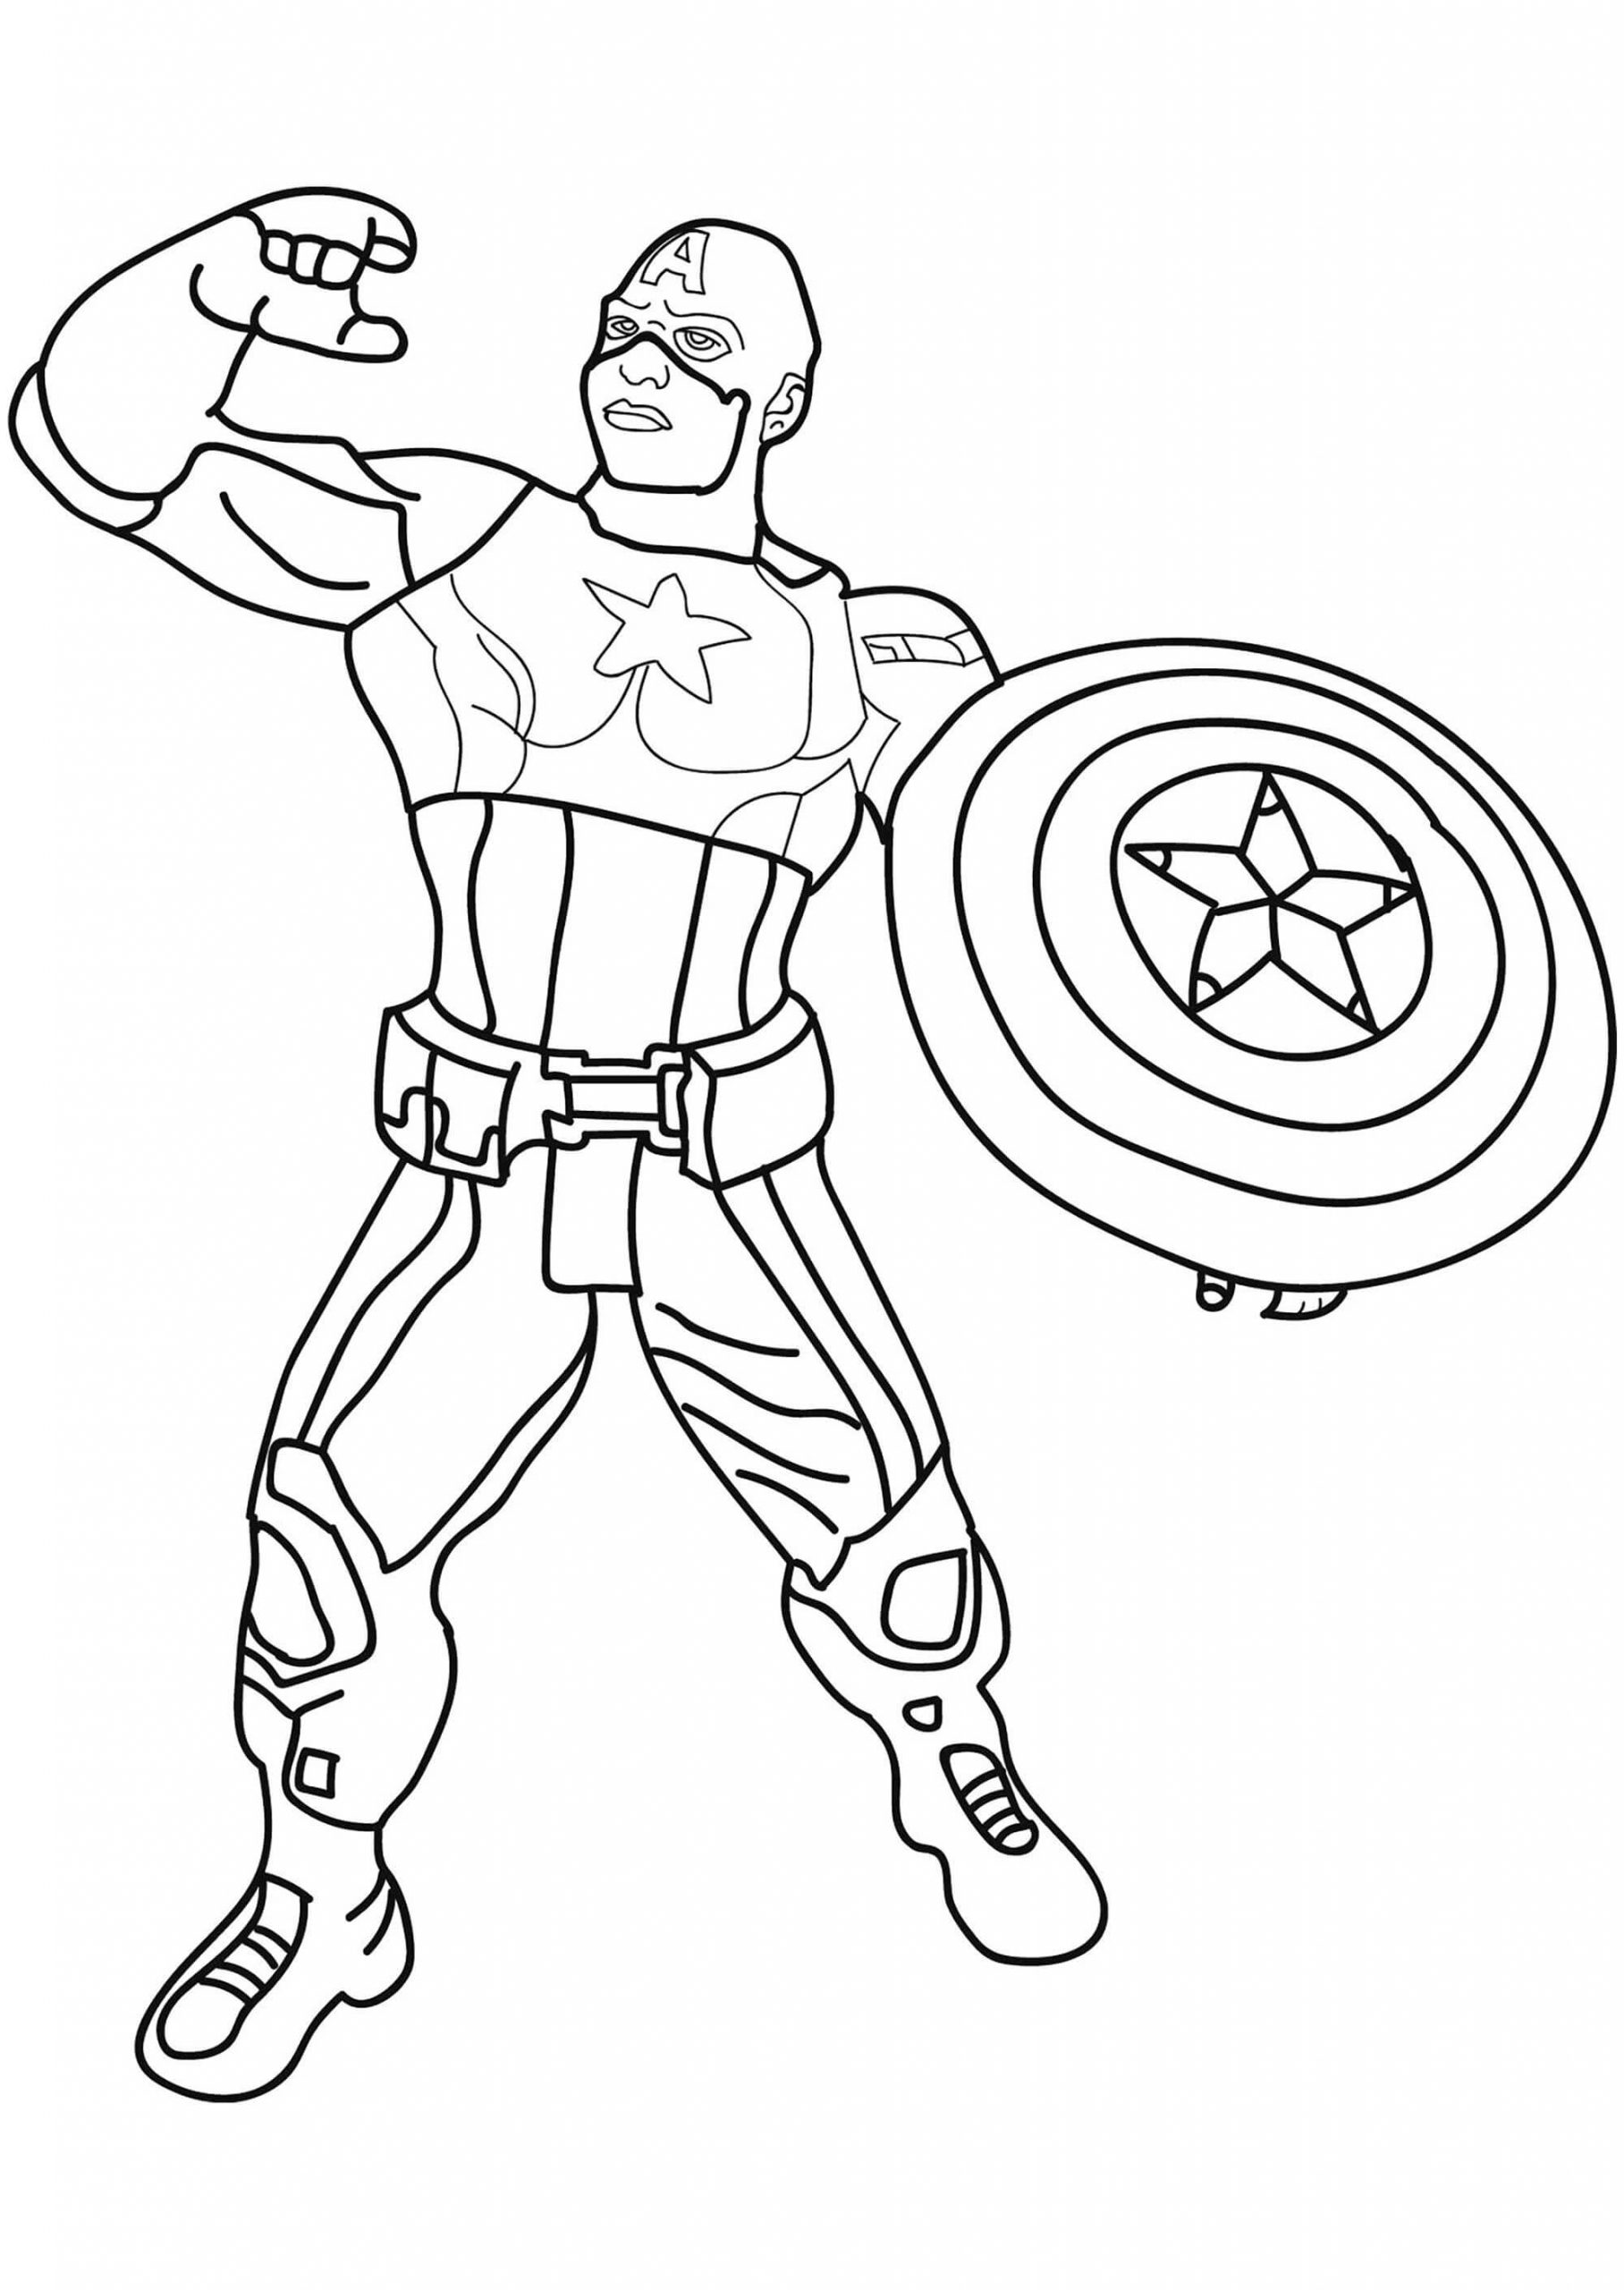 Captain America Fort coloring page